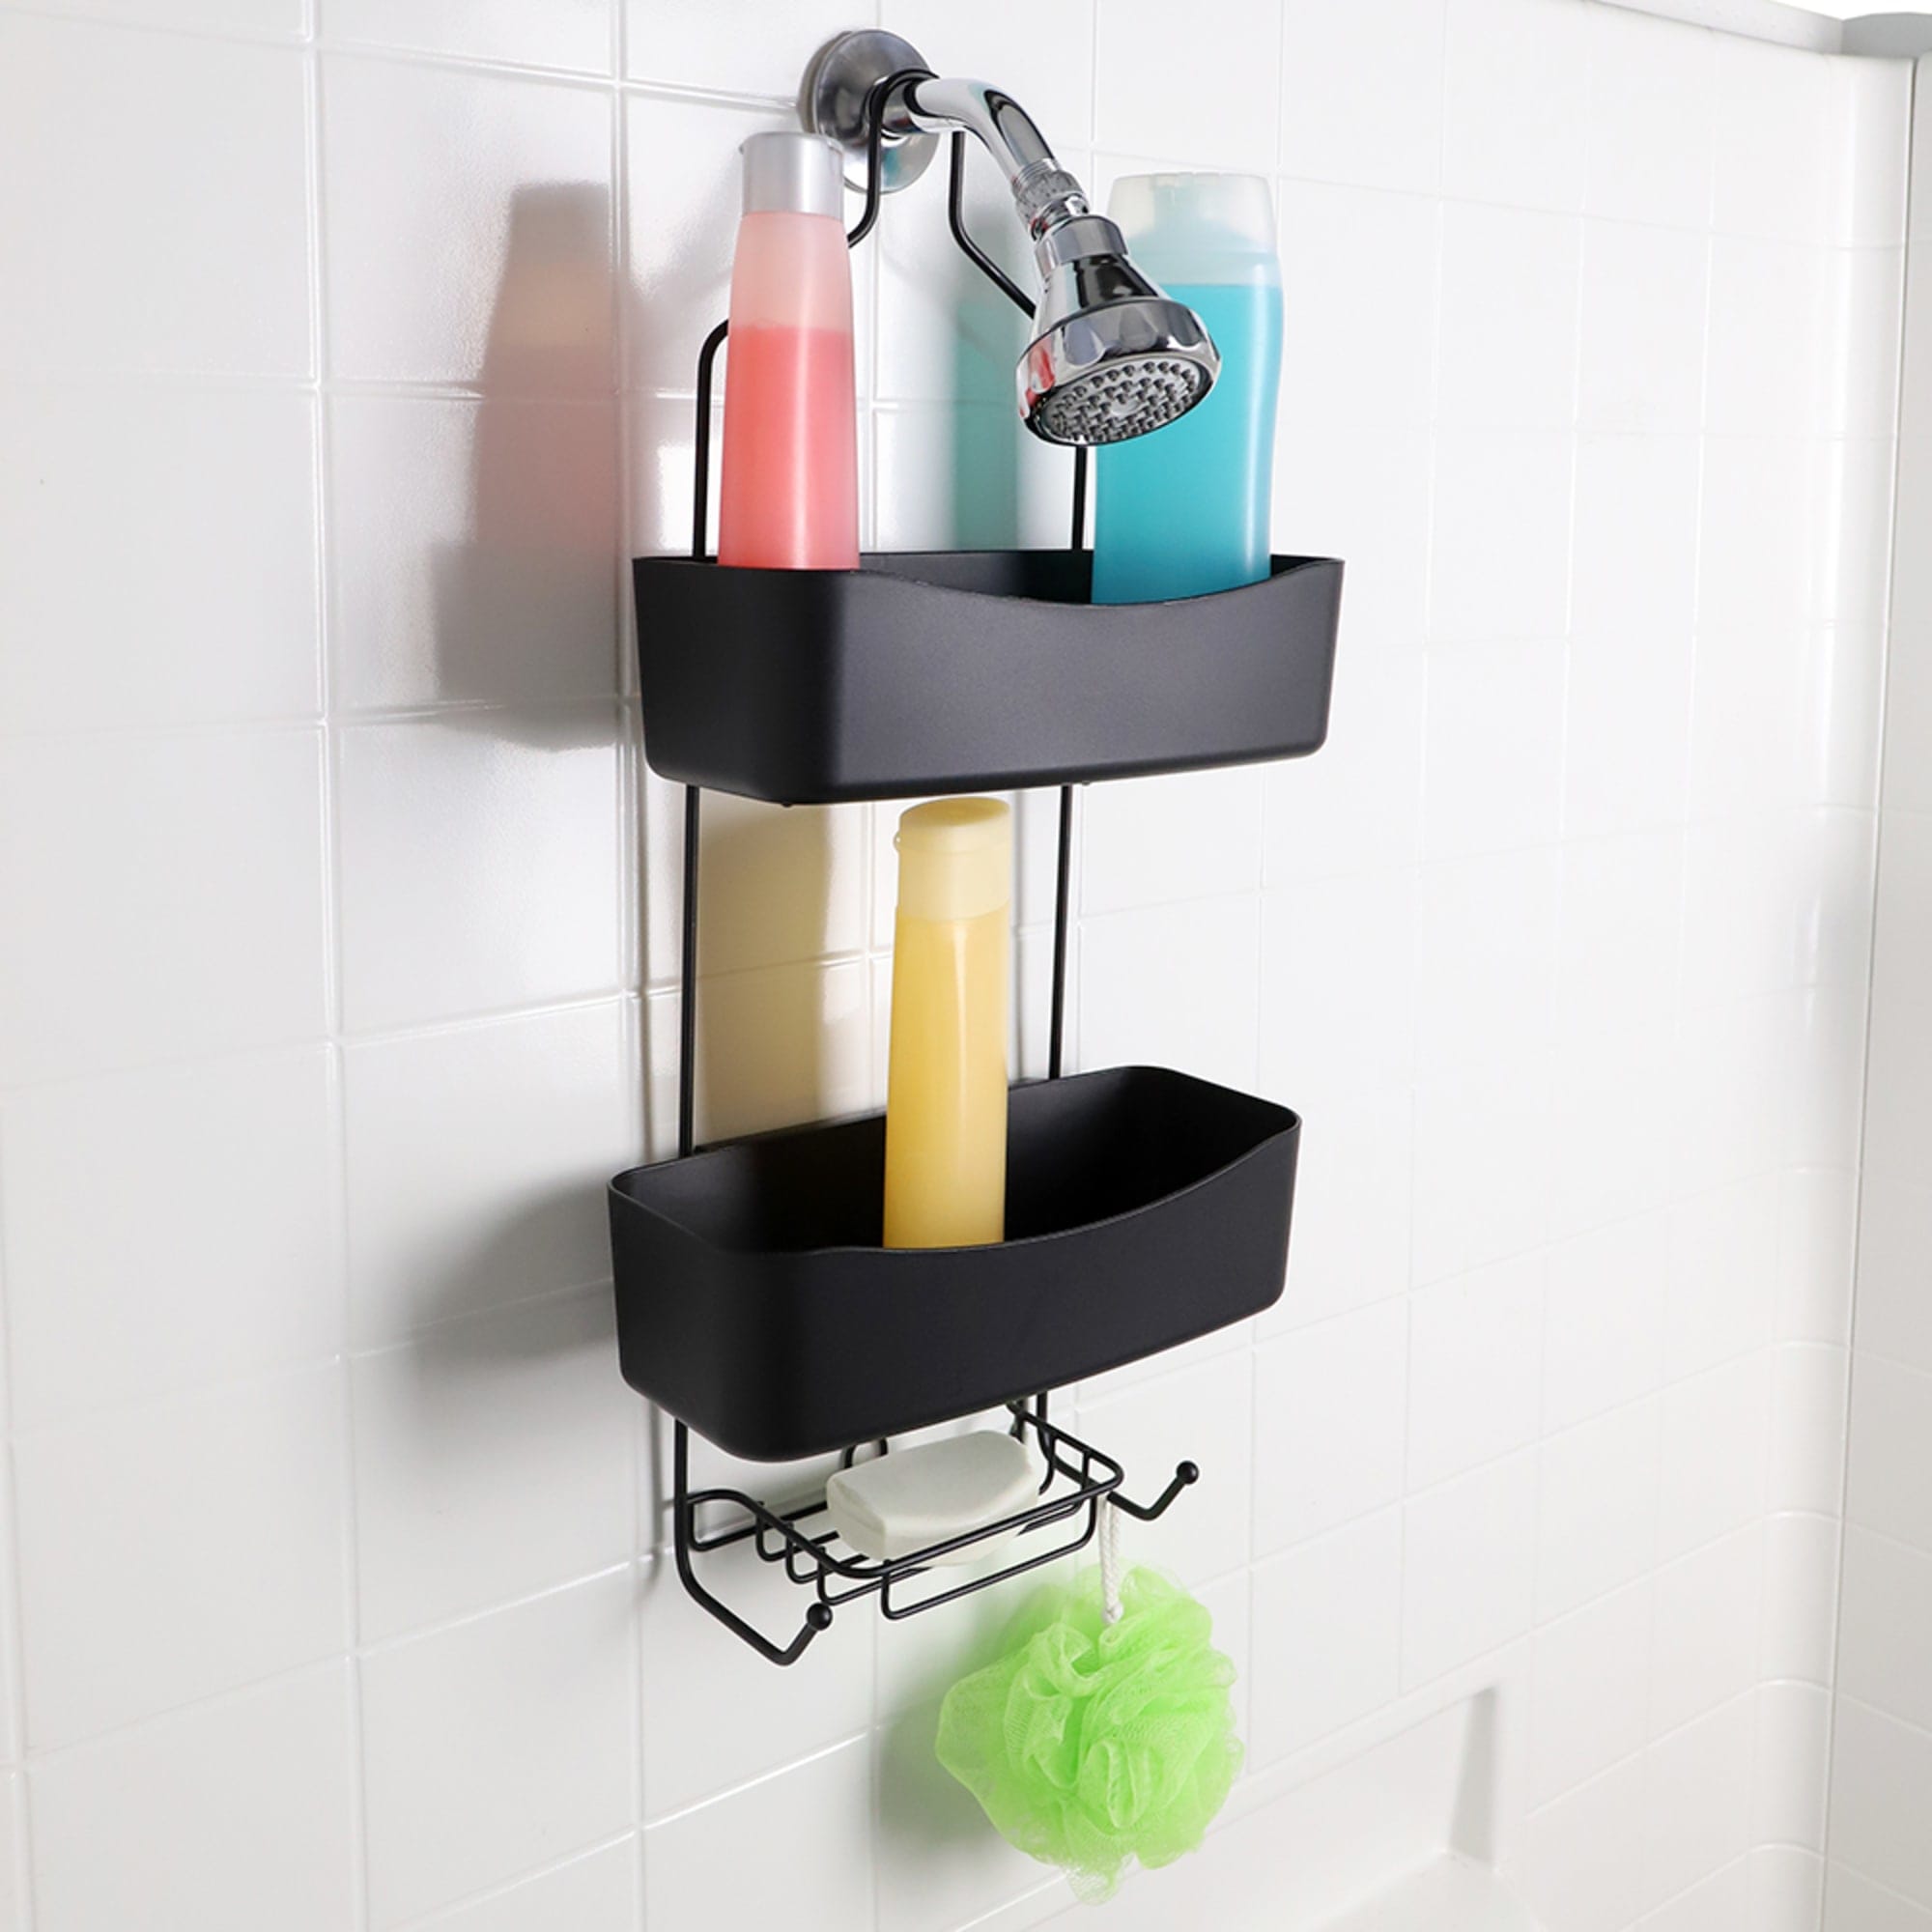 Home Basics 2 Tier Shower Caddy with Plastic Baskets, Black $10.00 EACH, CASE PACK OF 6